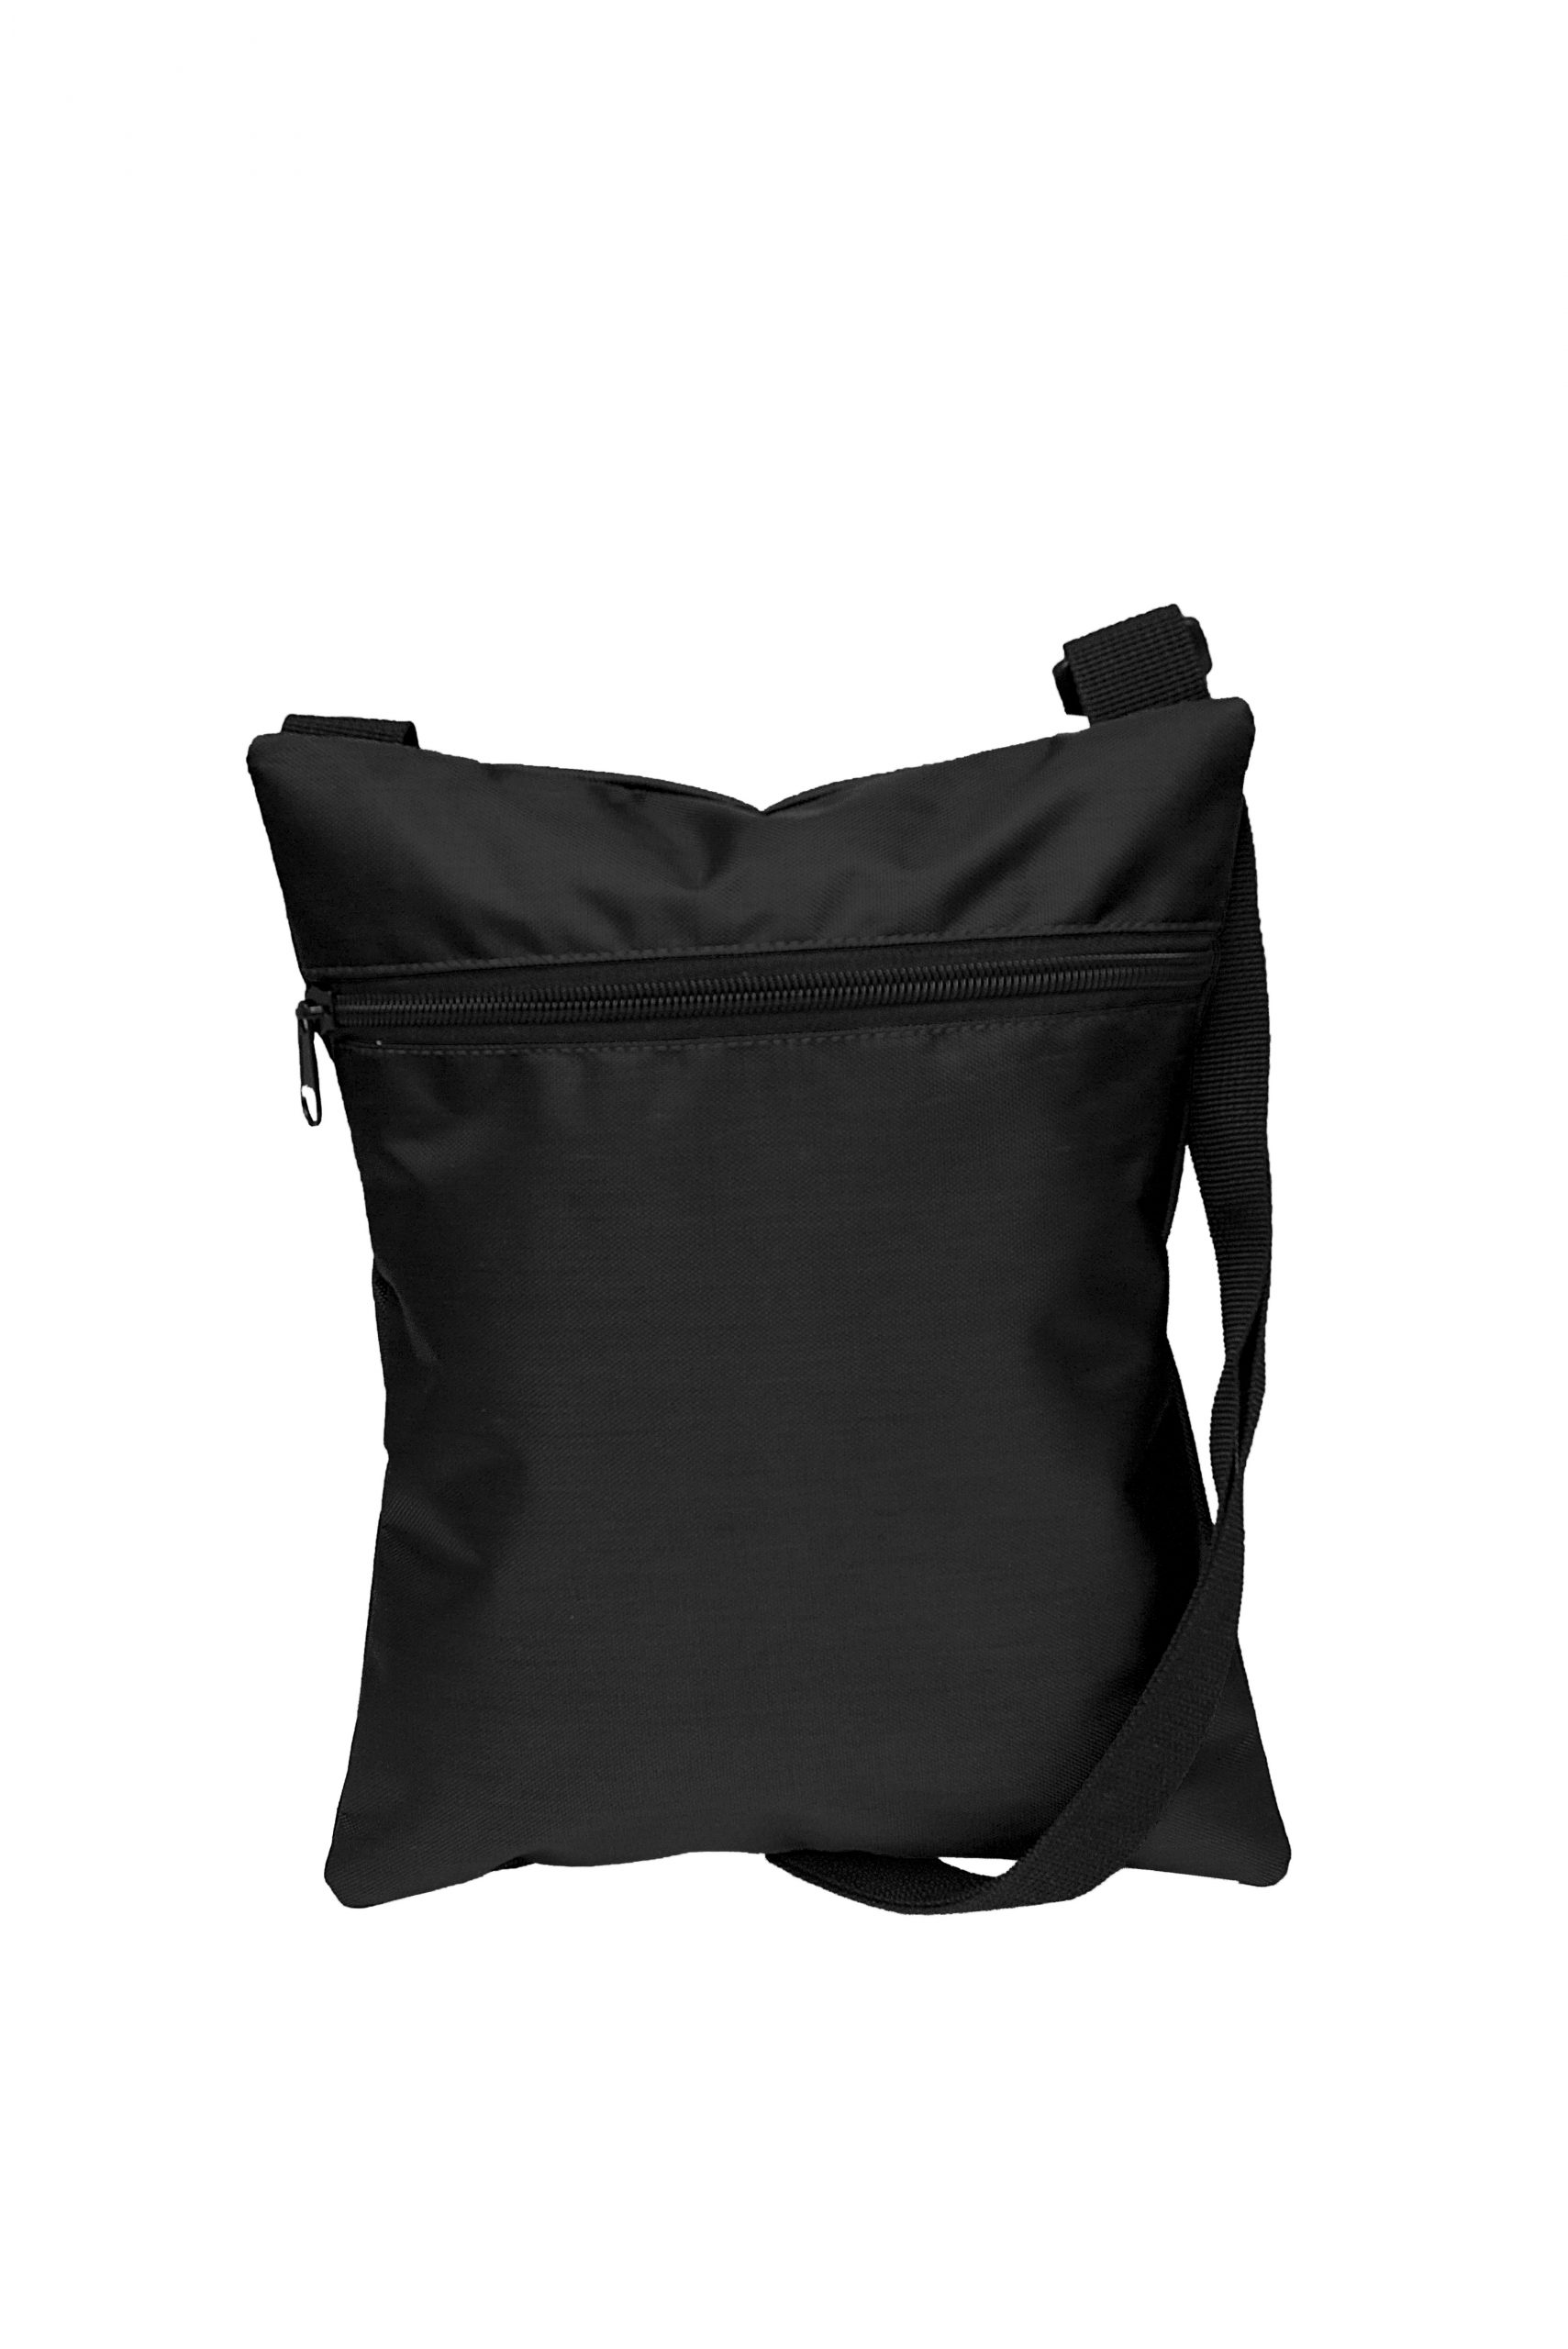 FGM-SL08 Sling Bag (Nylon) - Unique, Customized Corporate Gifts